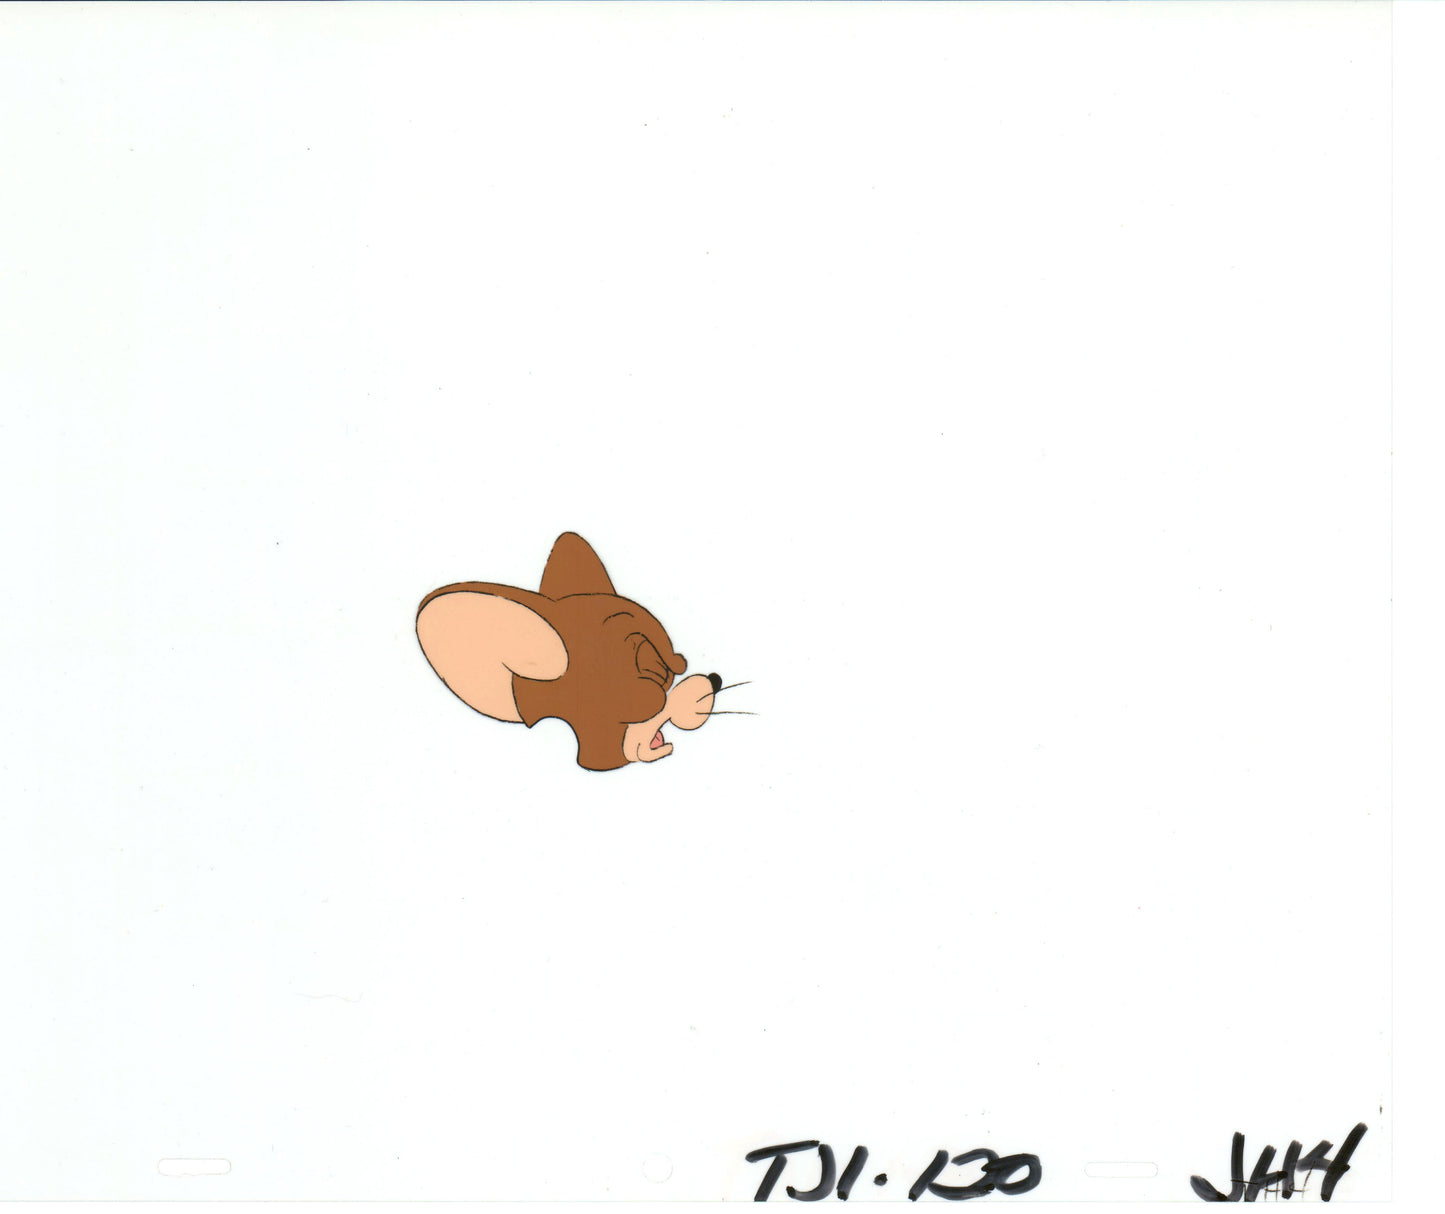 Tom and Jerry Original Production Animation Cel from Filmation 1980-82 b4246